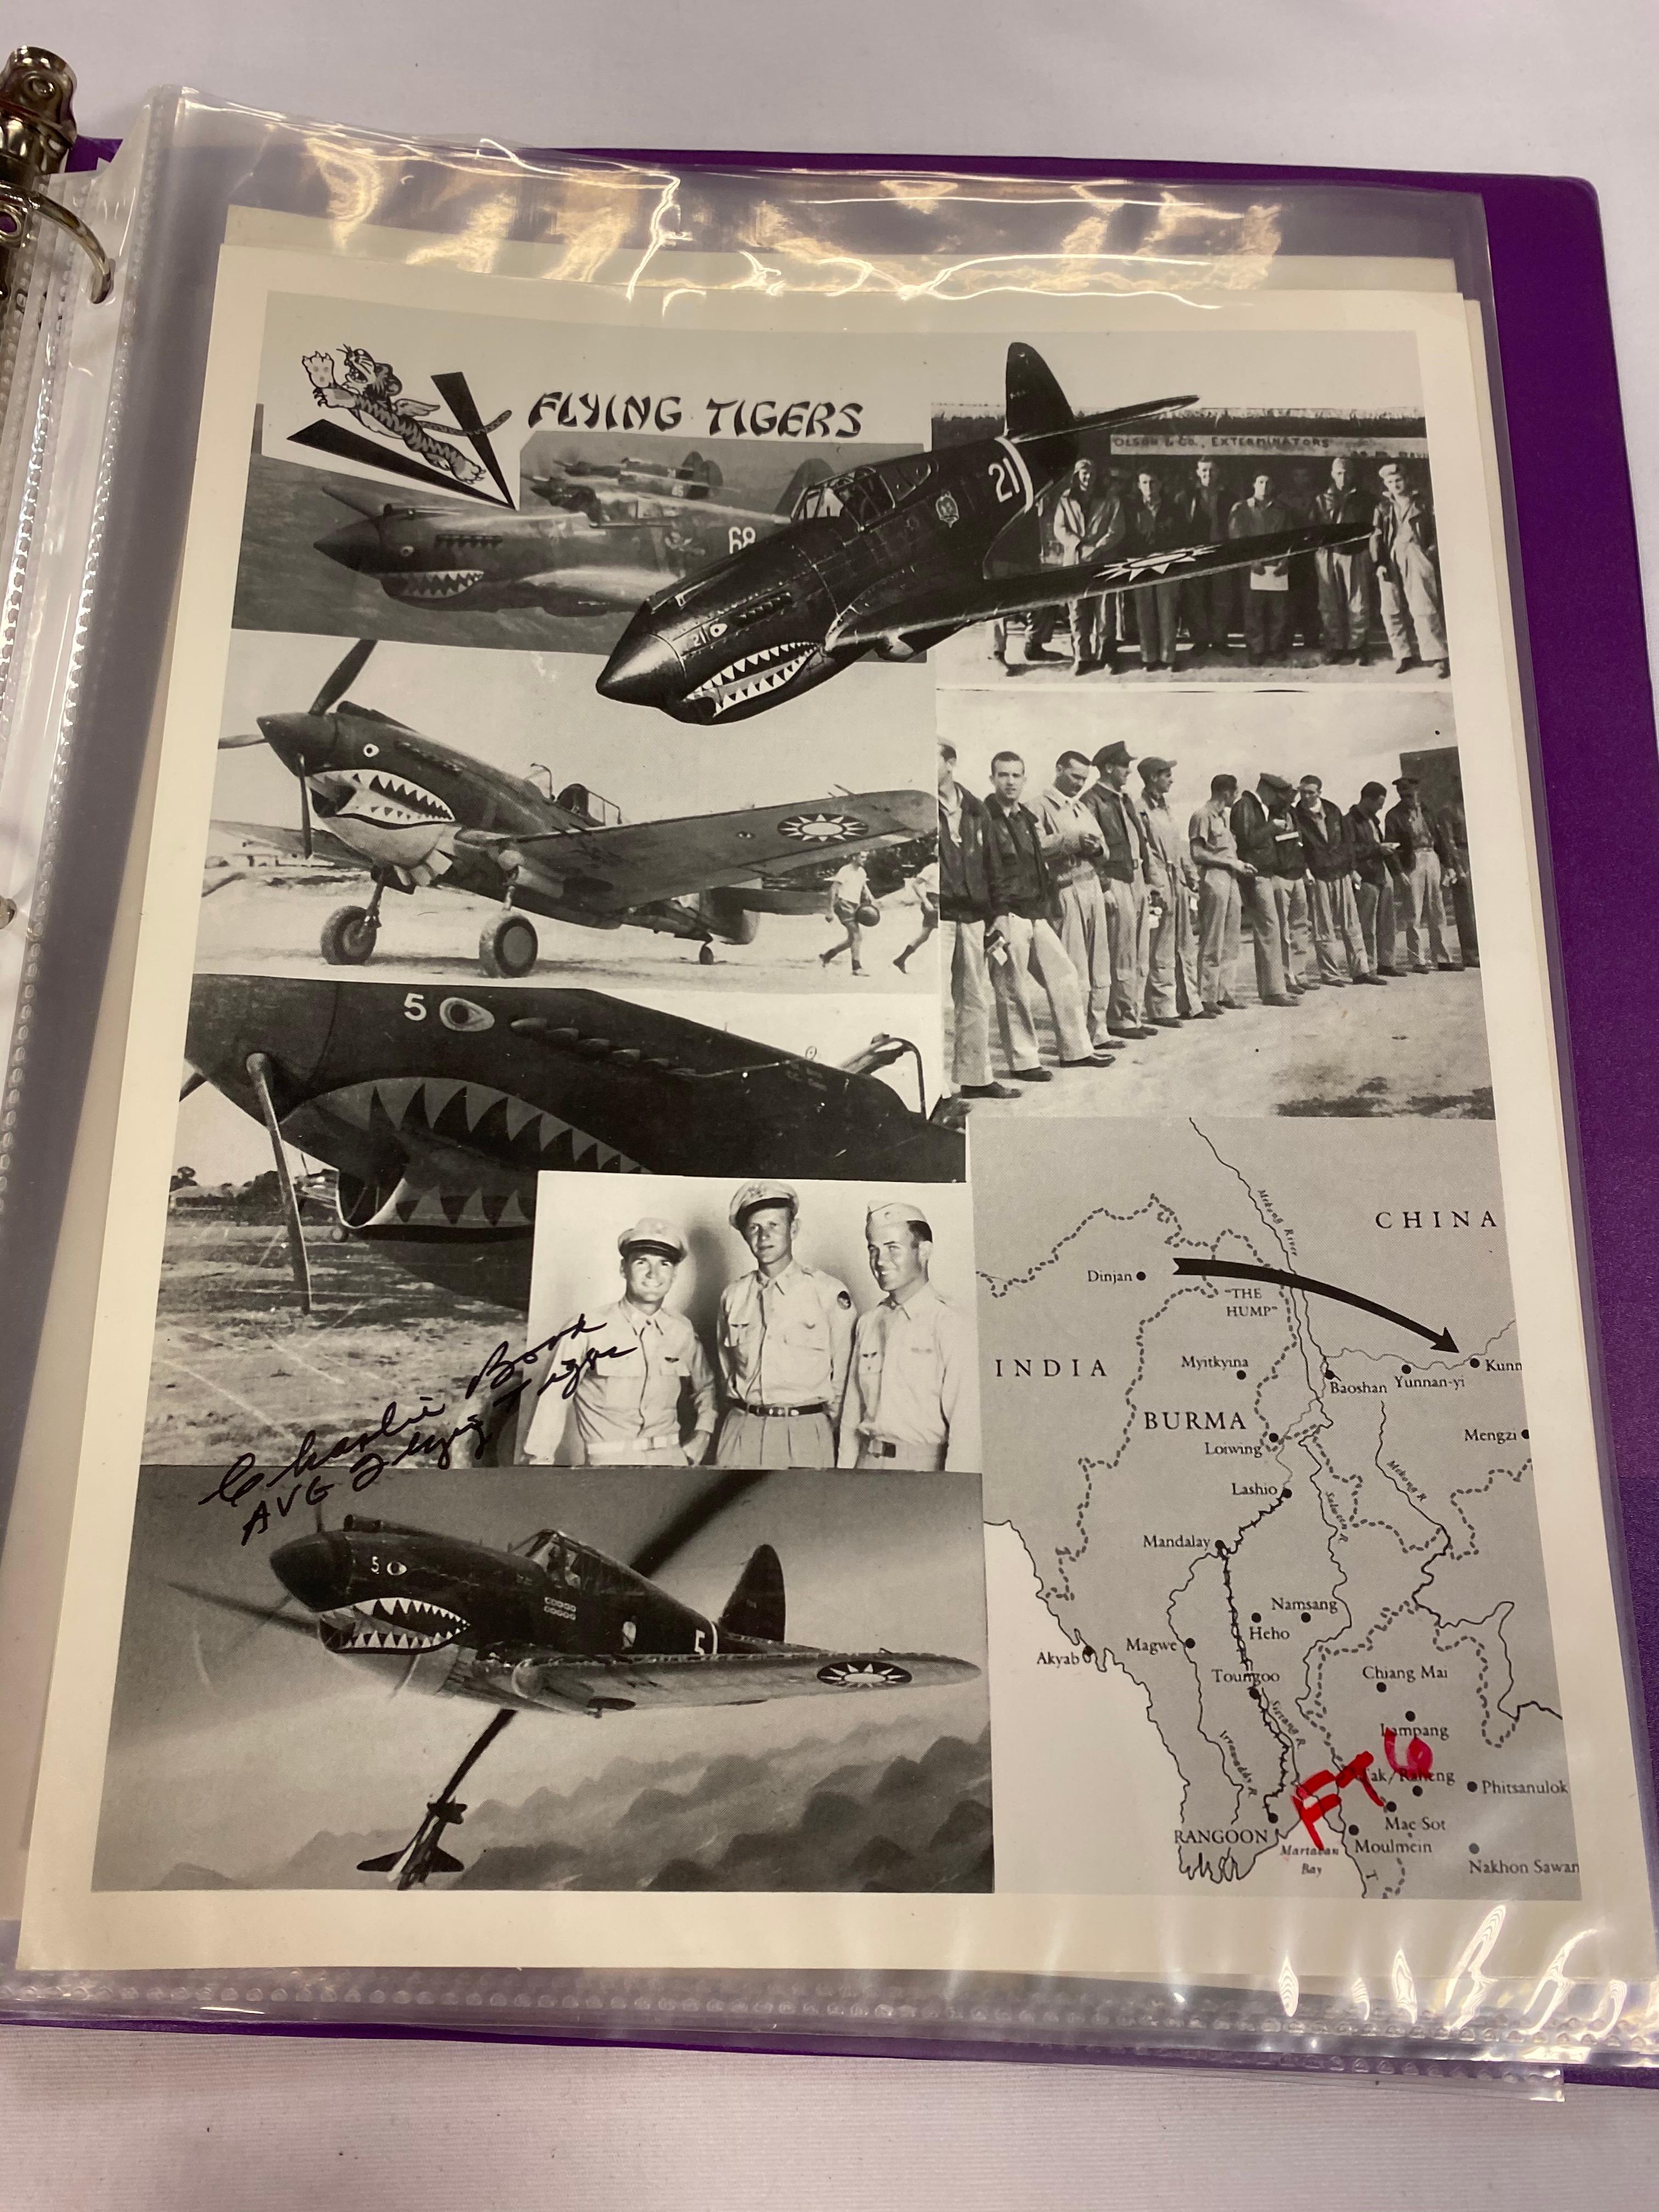 Various War Photos and Plane Pictures